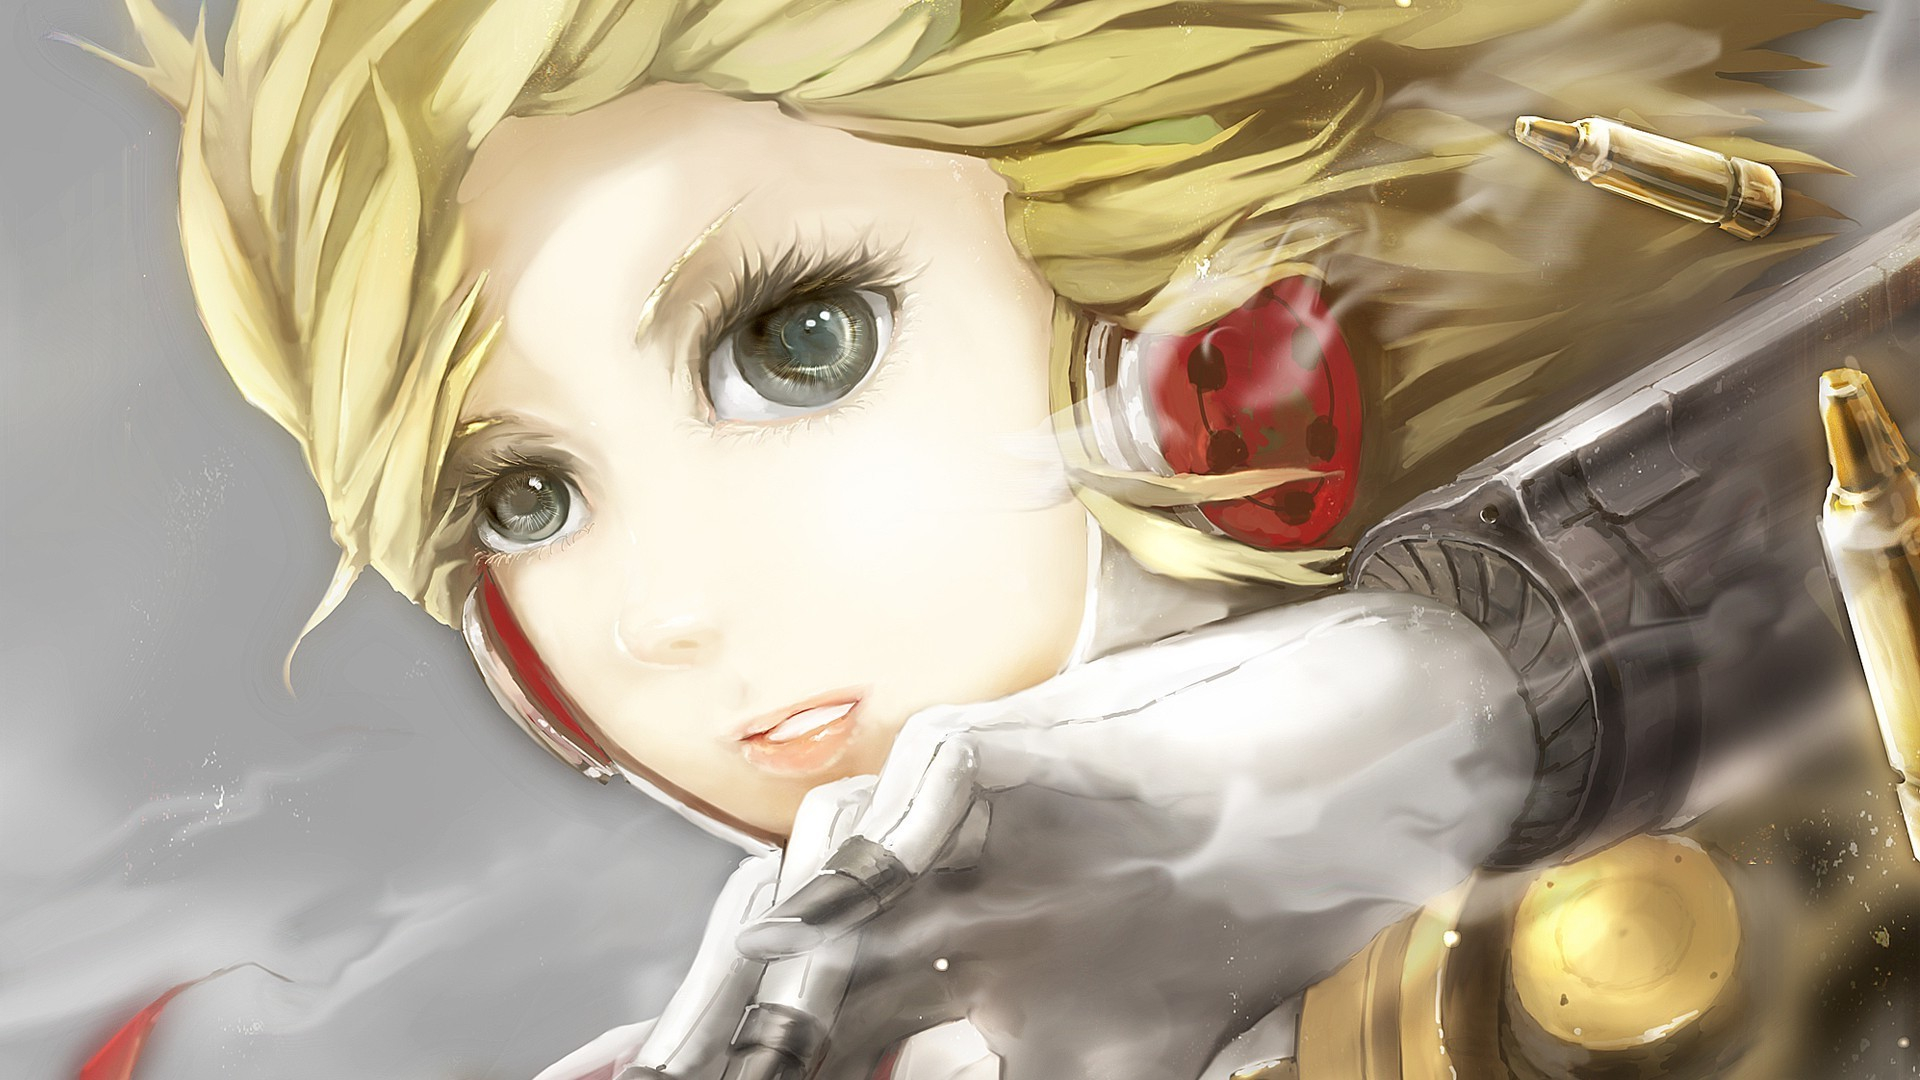 1920x1080 Wallpaper : anime, Persona 3, Persona series, Toy, Aigis, clothing, eye, px wallpaperUp 584498 HD Wallpapers